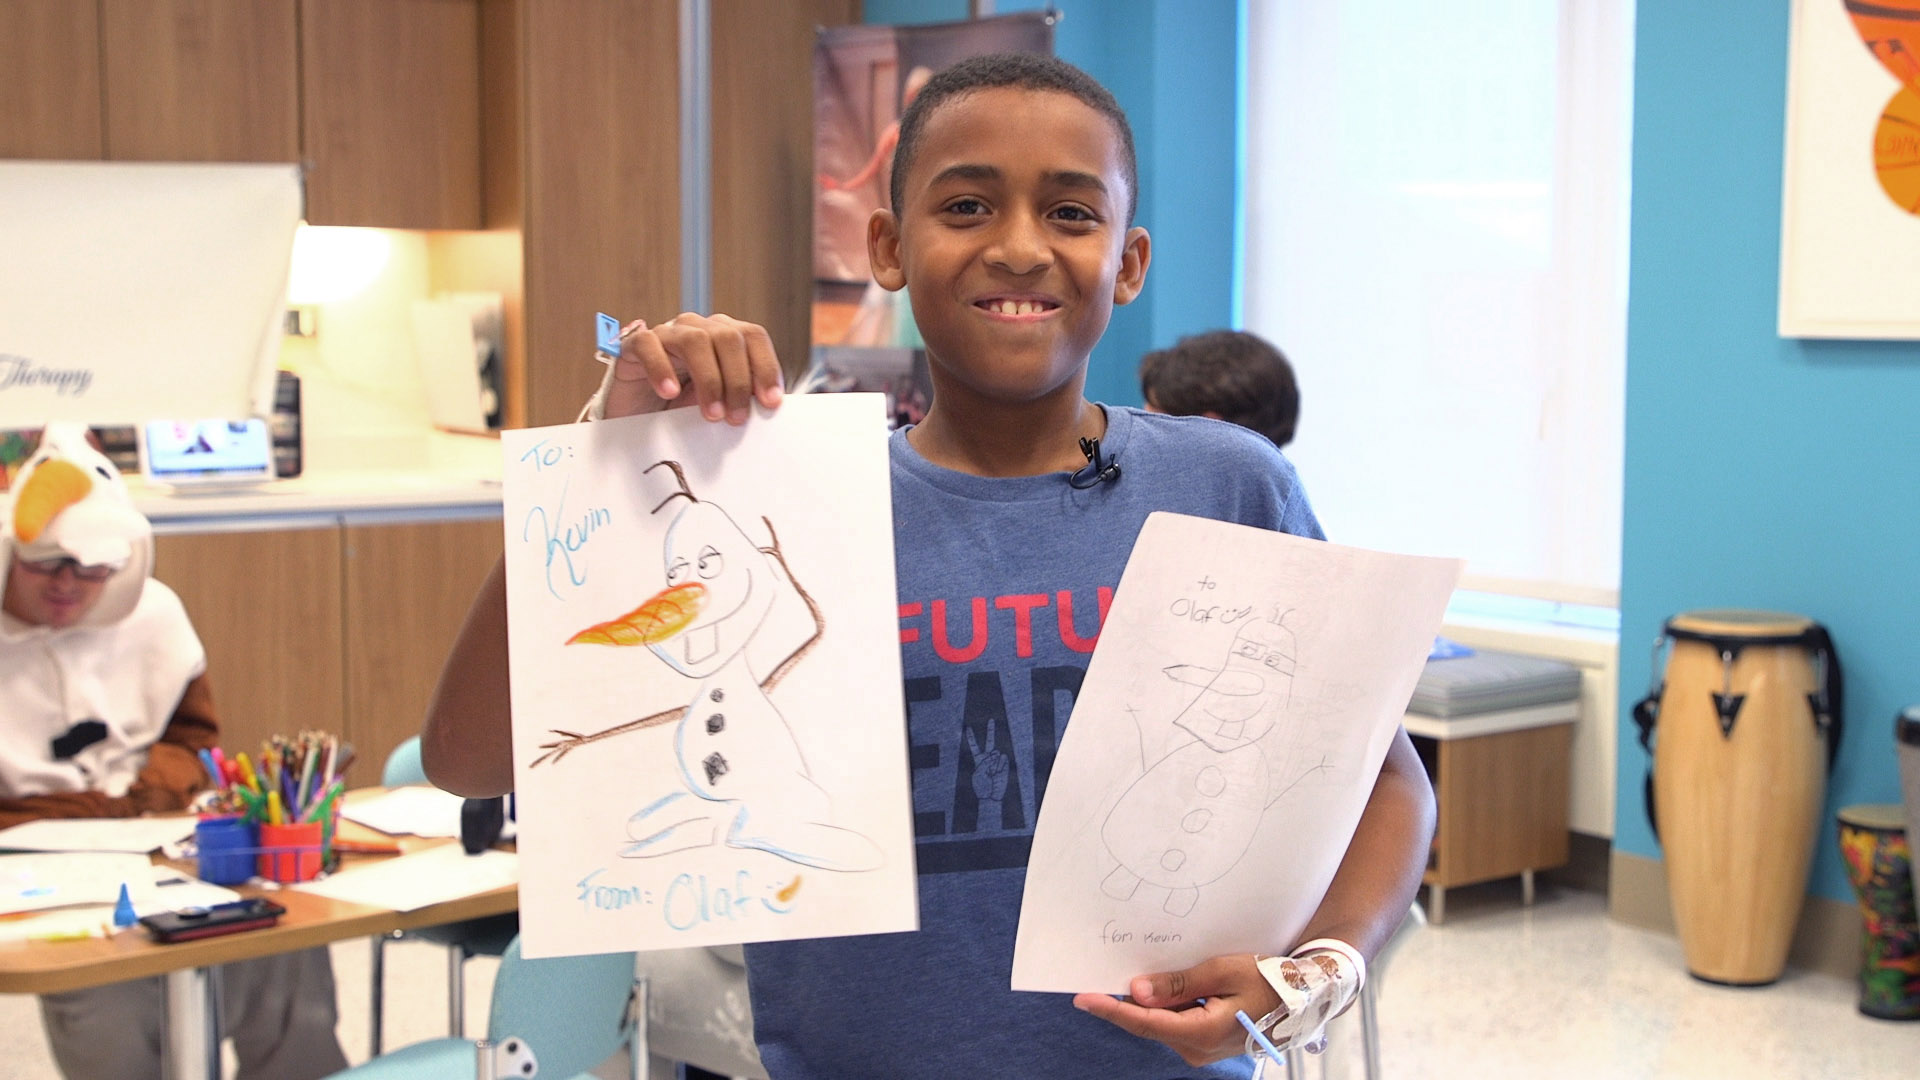 PHOTO: Kevin Joseph, a patient at New York Presbyterian Hospital shows off his portrait drawn by Olaf.